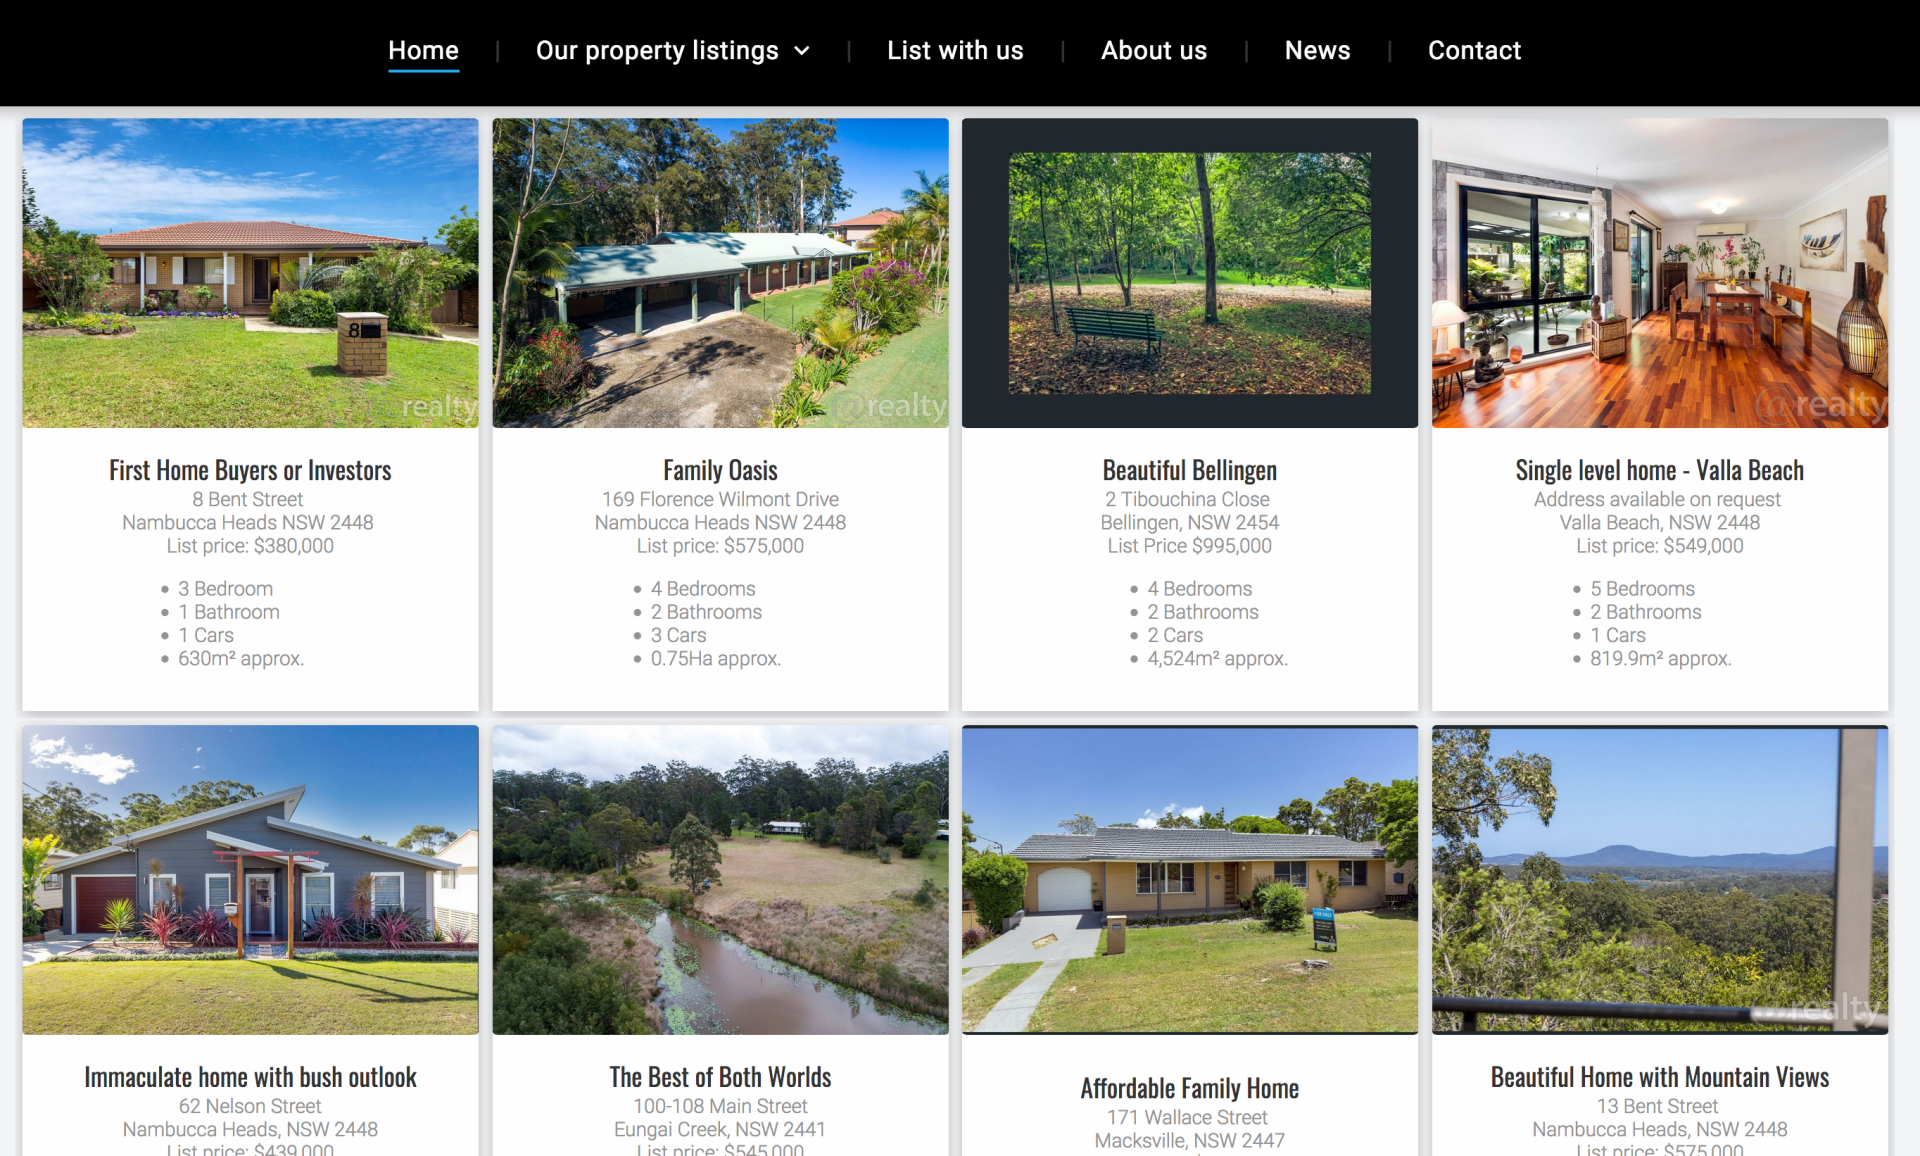 Real Estate Nambucca photo gallery image as a website example